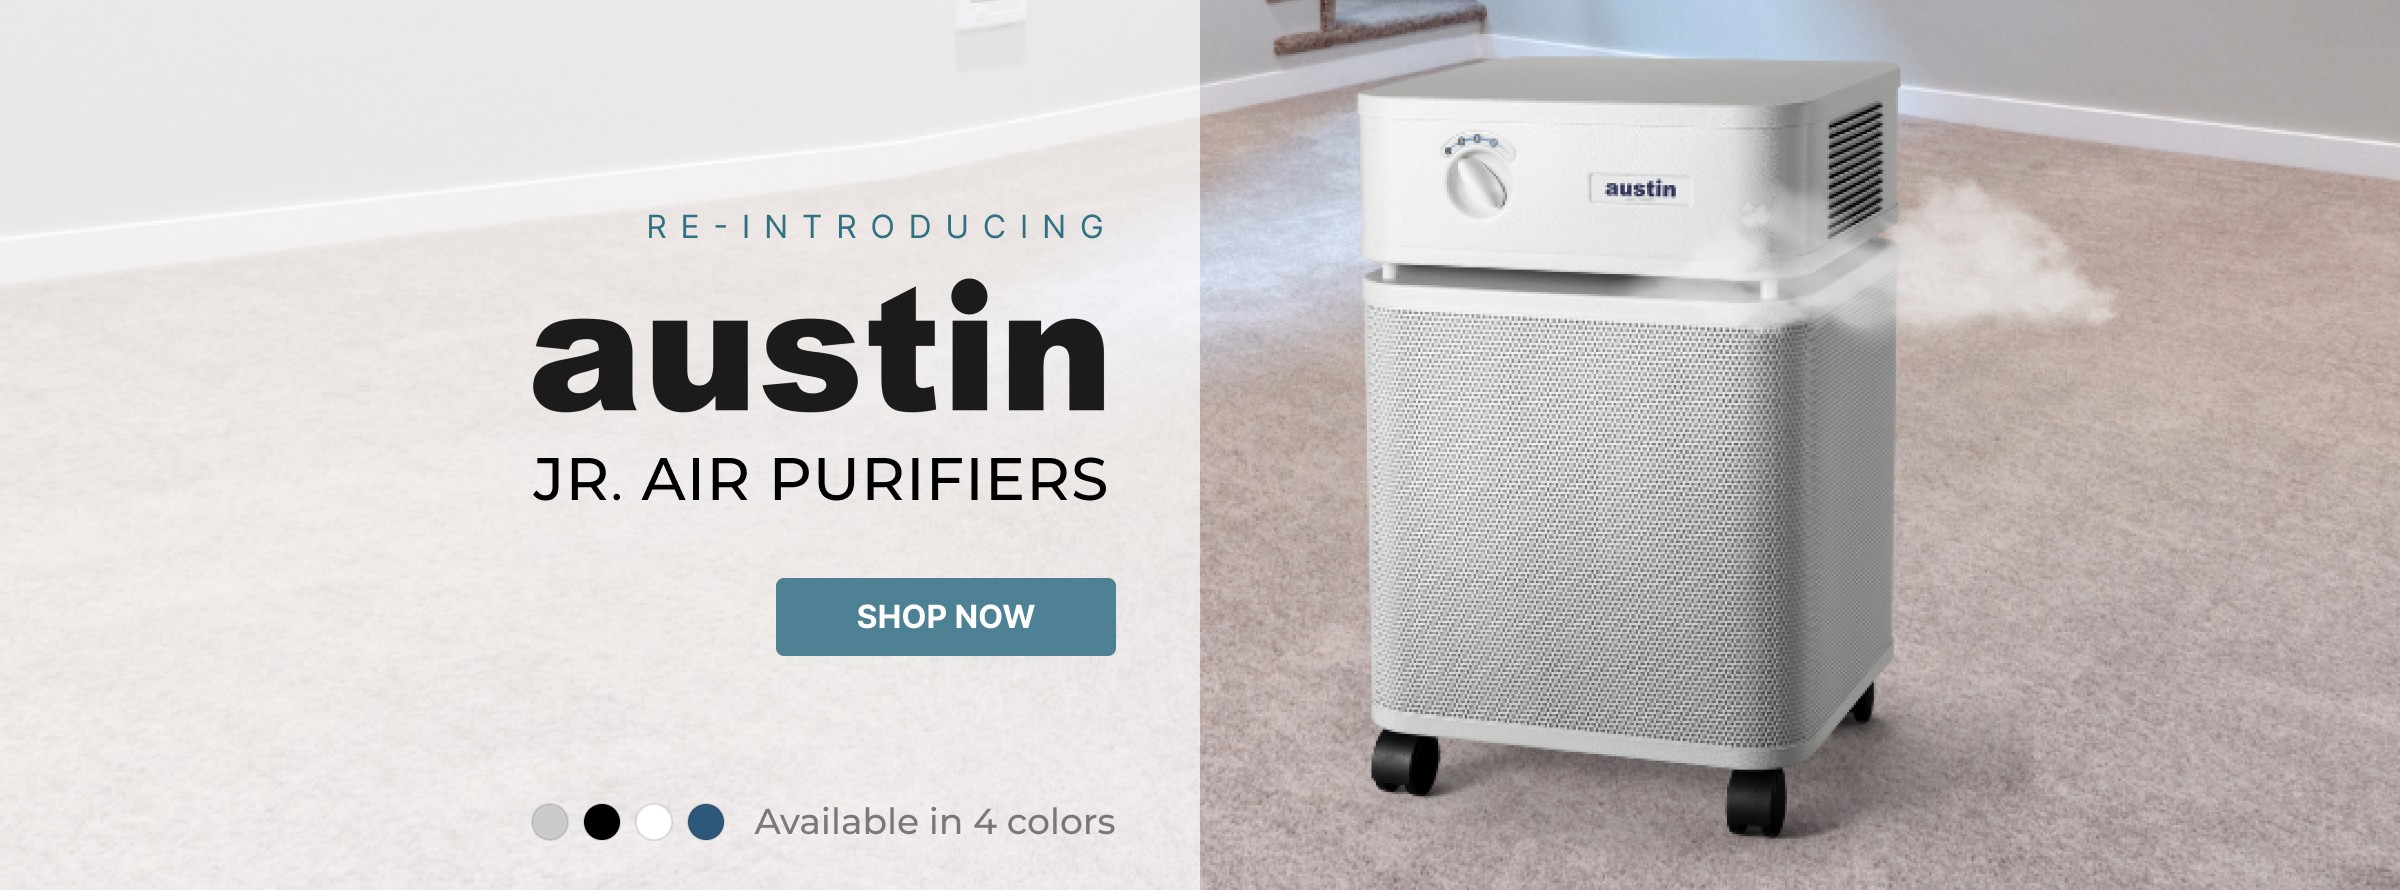 Re-Introducing Austin Air Healthmate Junior Air Purifiers - available in 4 colors